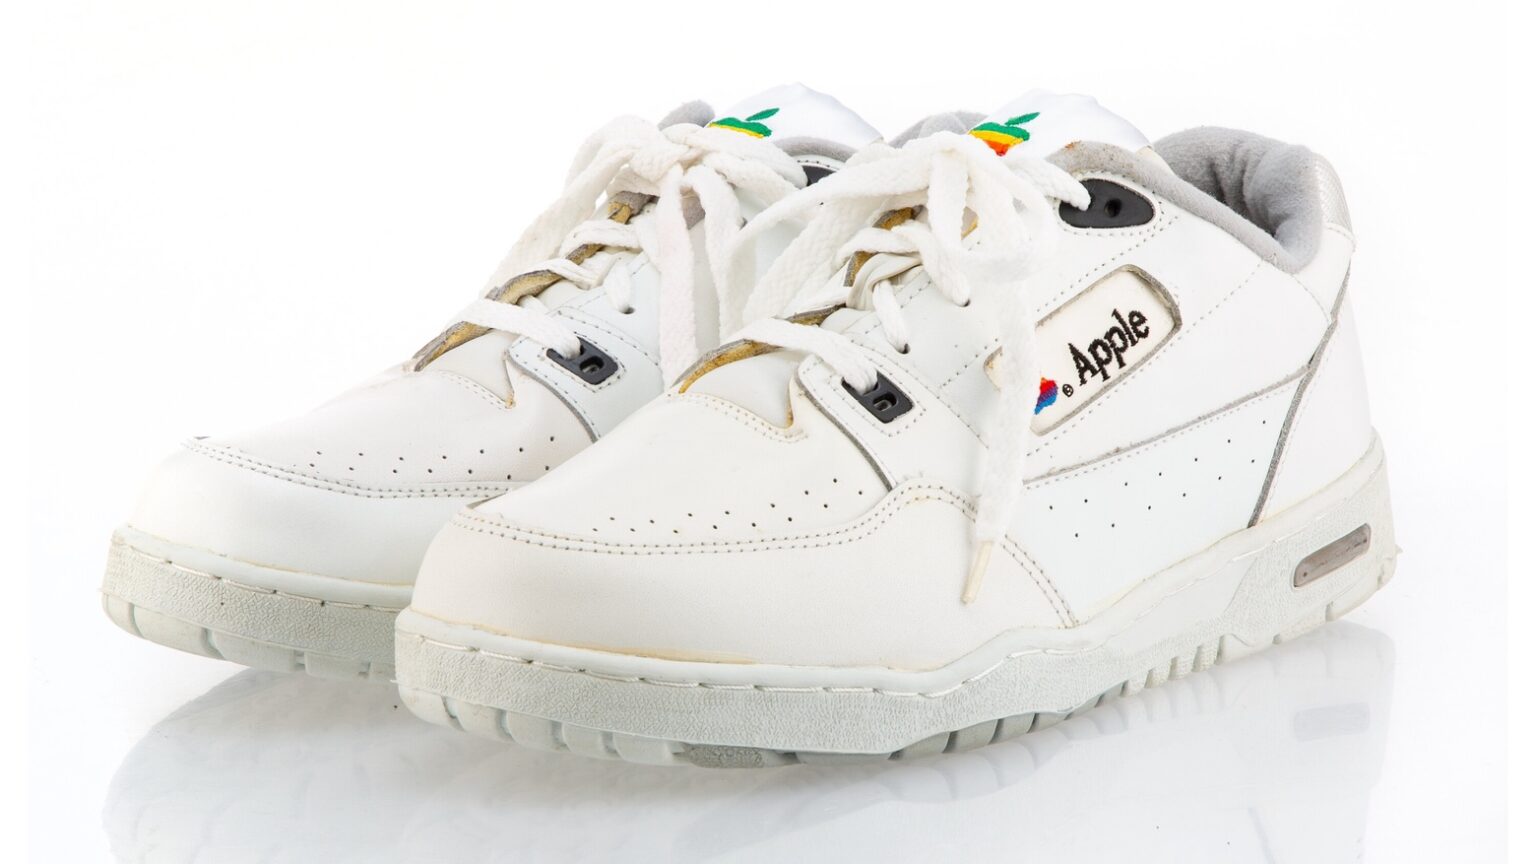 These ultra-rare Apple Computer Sneakers might auction for big bucks